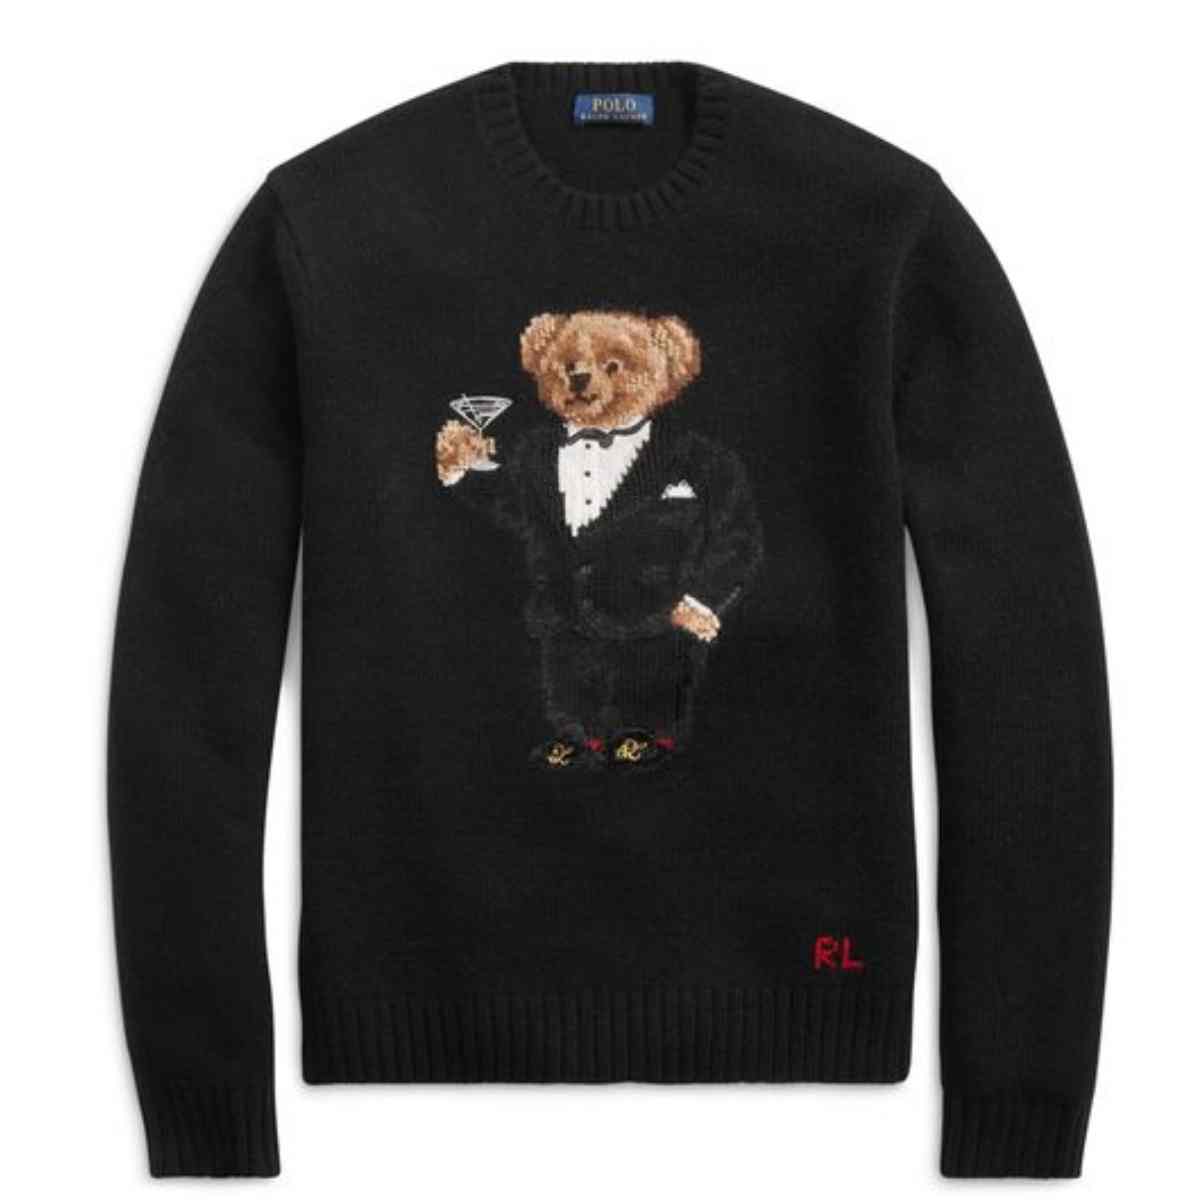 What is the polo ralph lauren bear 